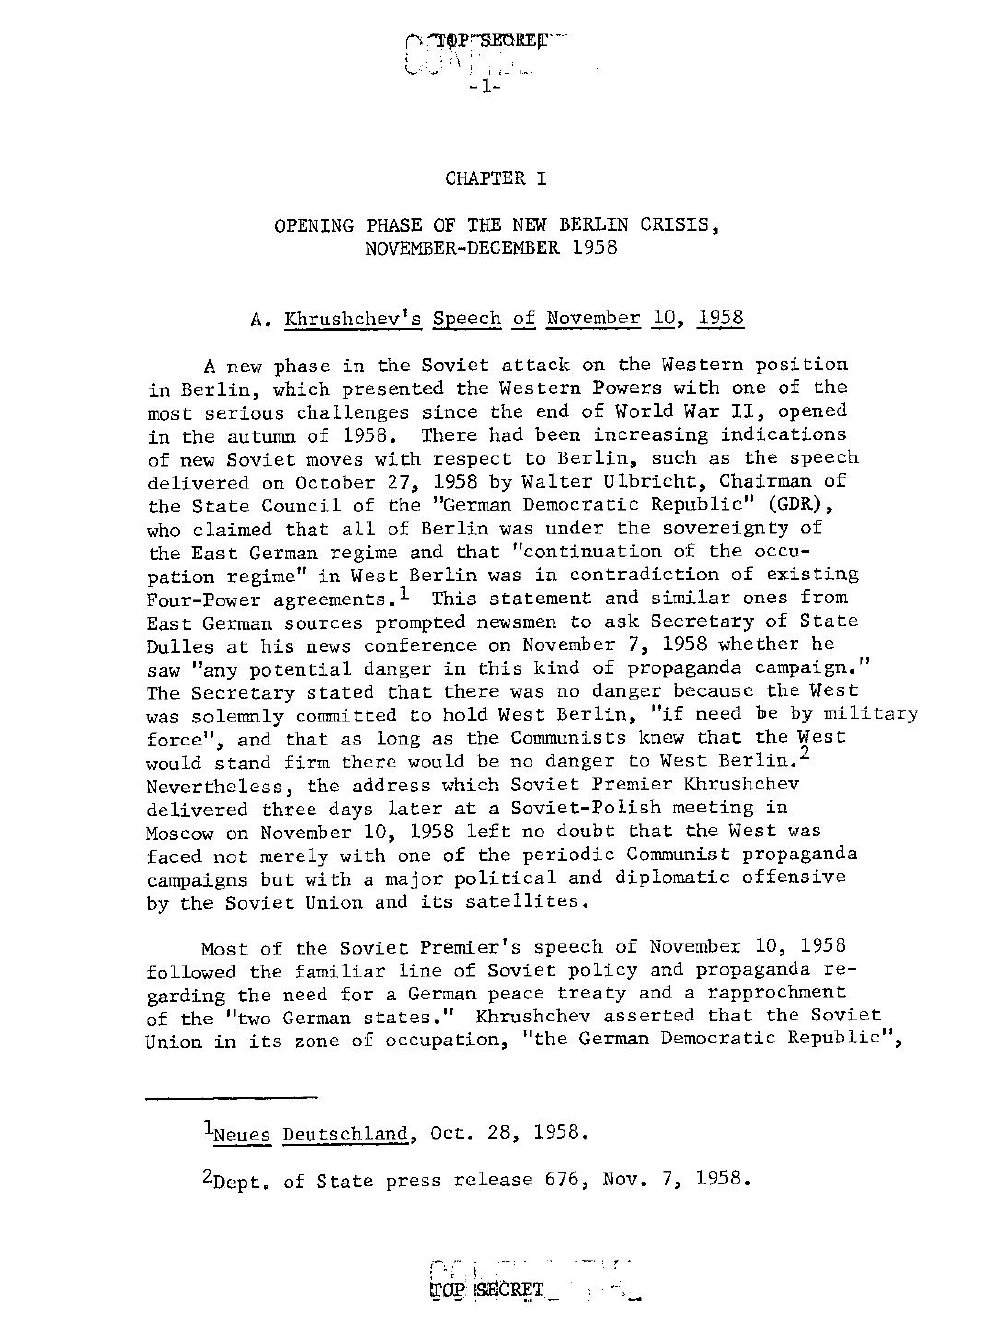 Berlin-Crisis-State-Department-Historical-Documents-Page-1